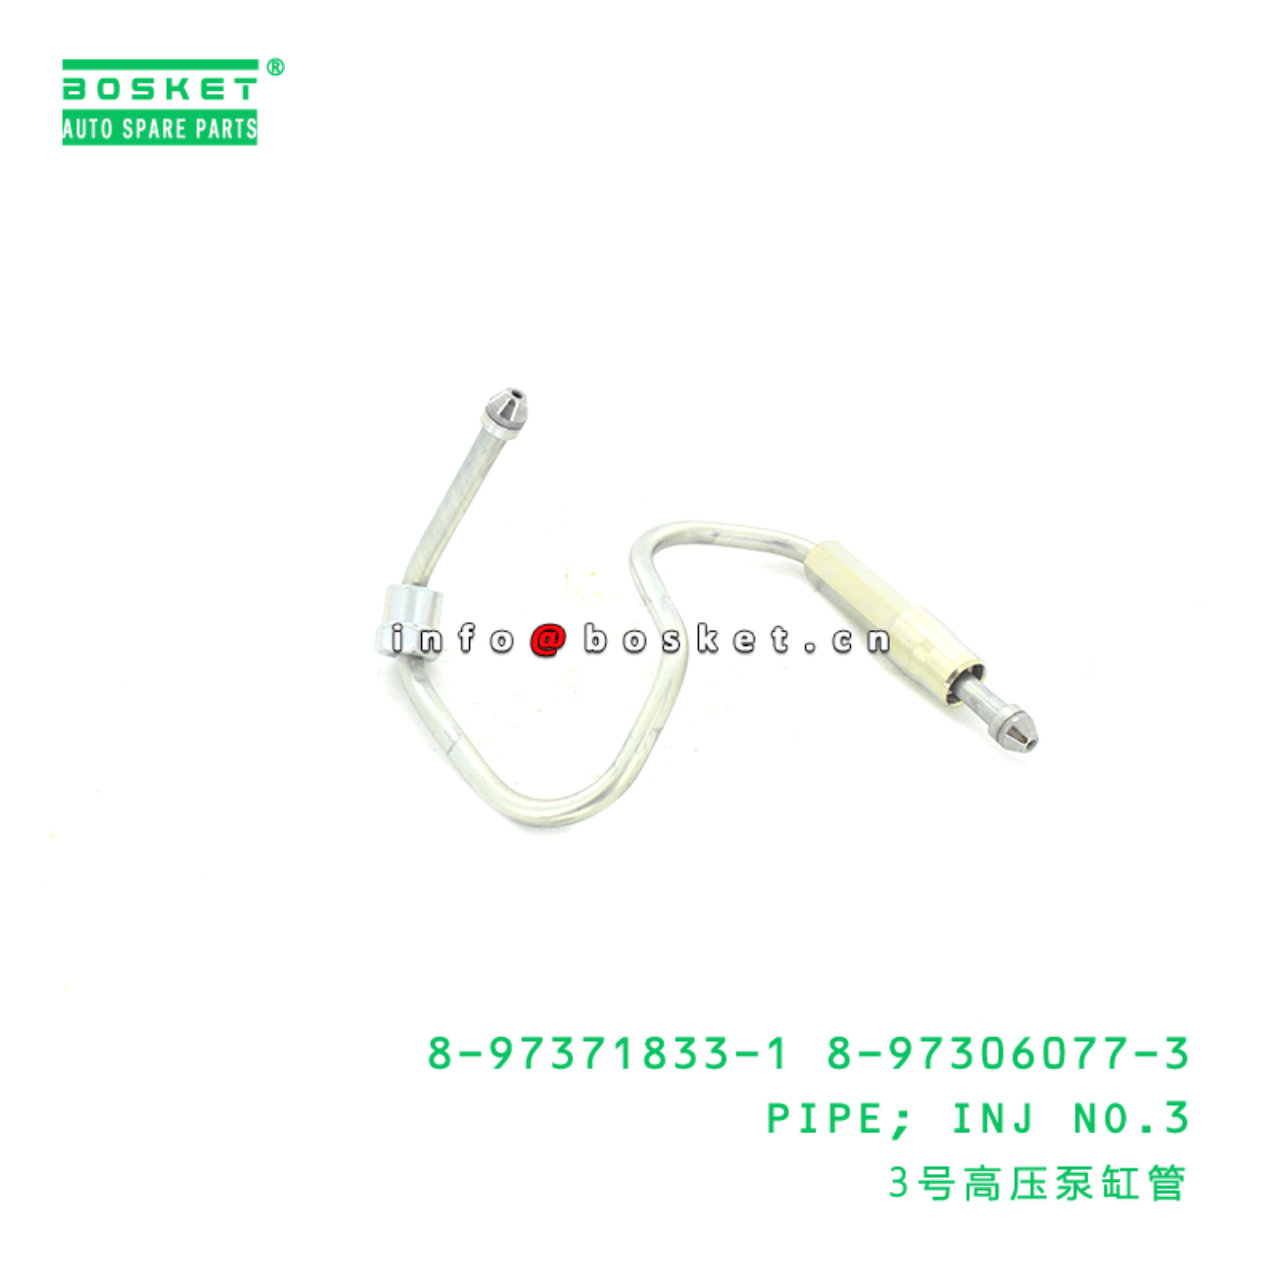 8-97371833-1 8-97306077-3 Injection No.3 Pipe 8973718331 8973060773 Suitable for ISUZU NPR 4HK1